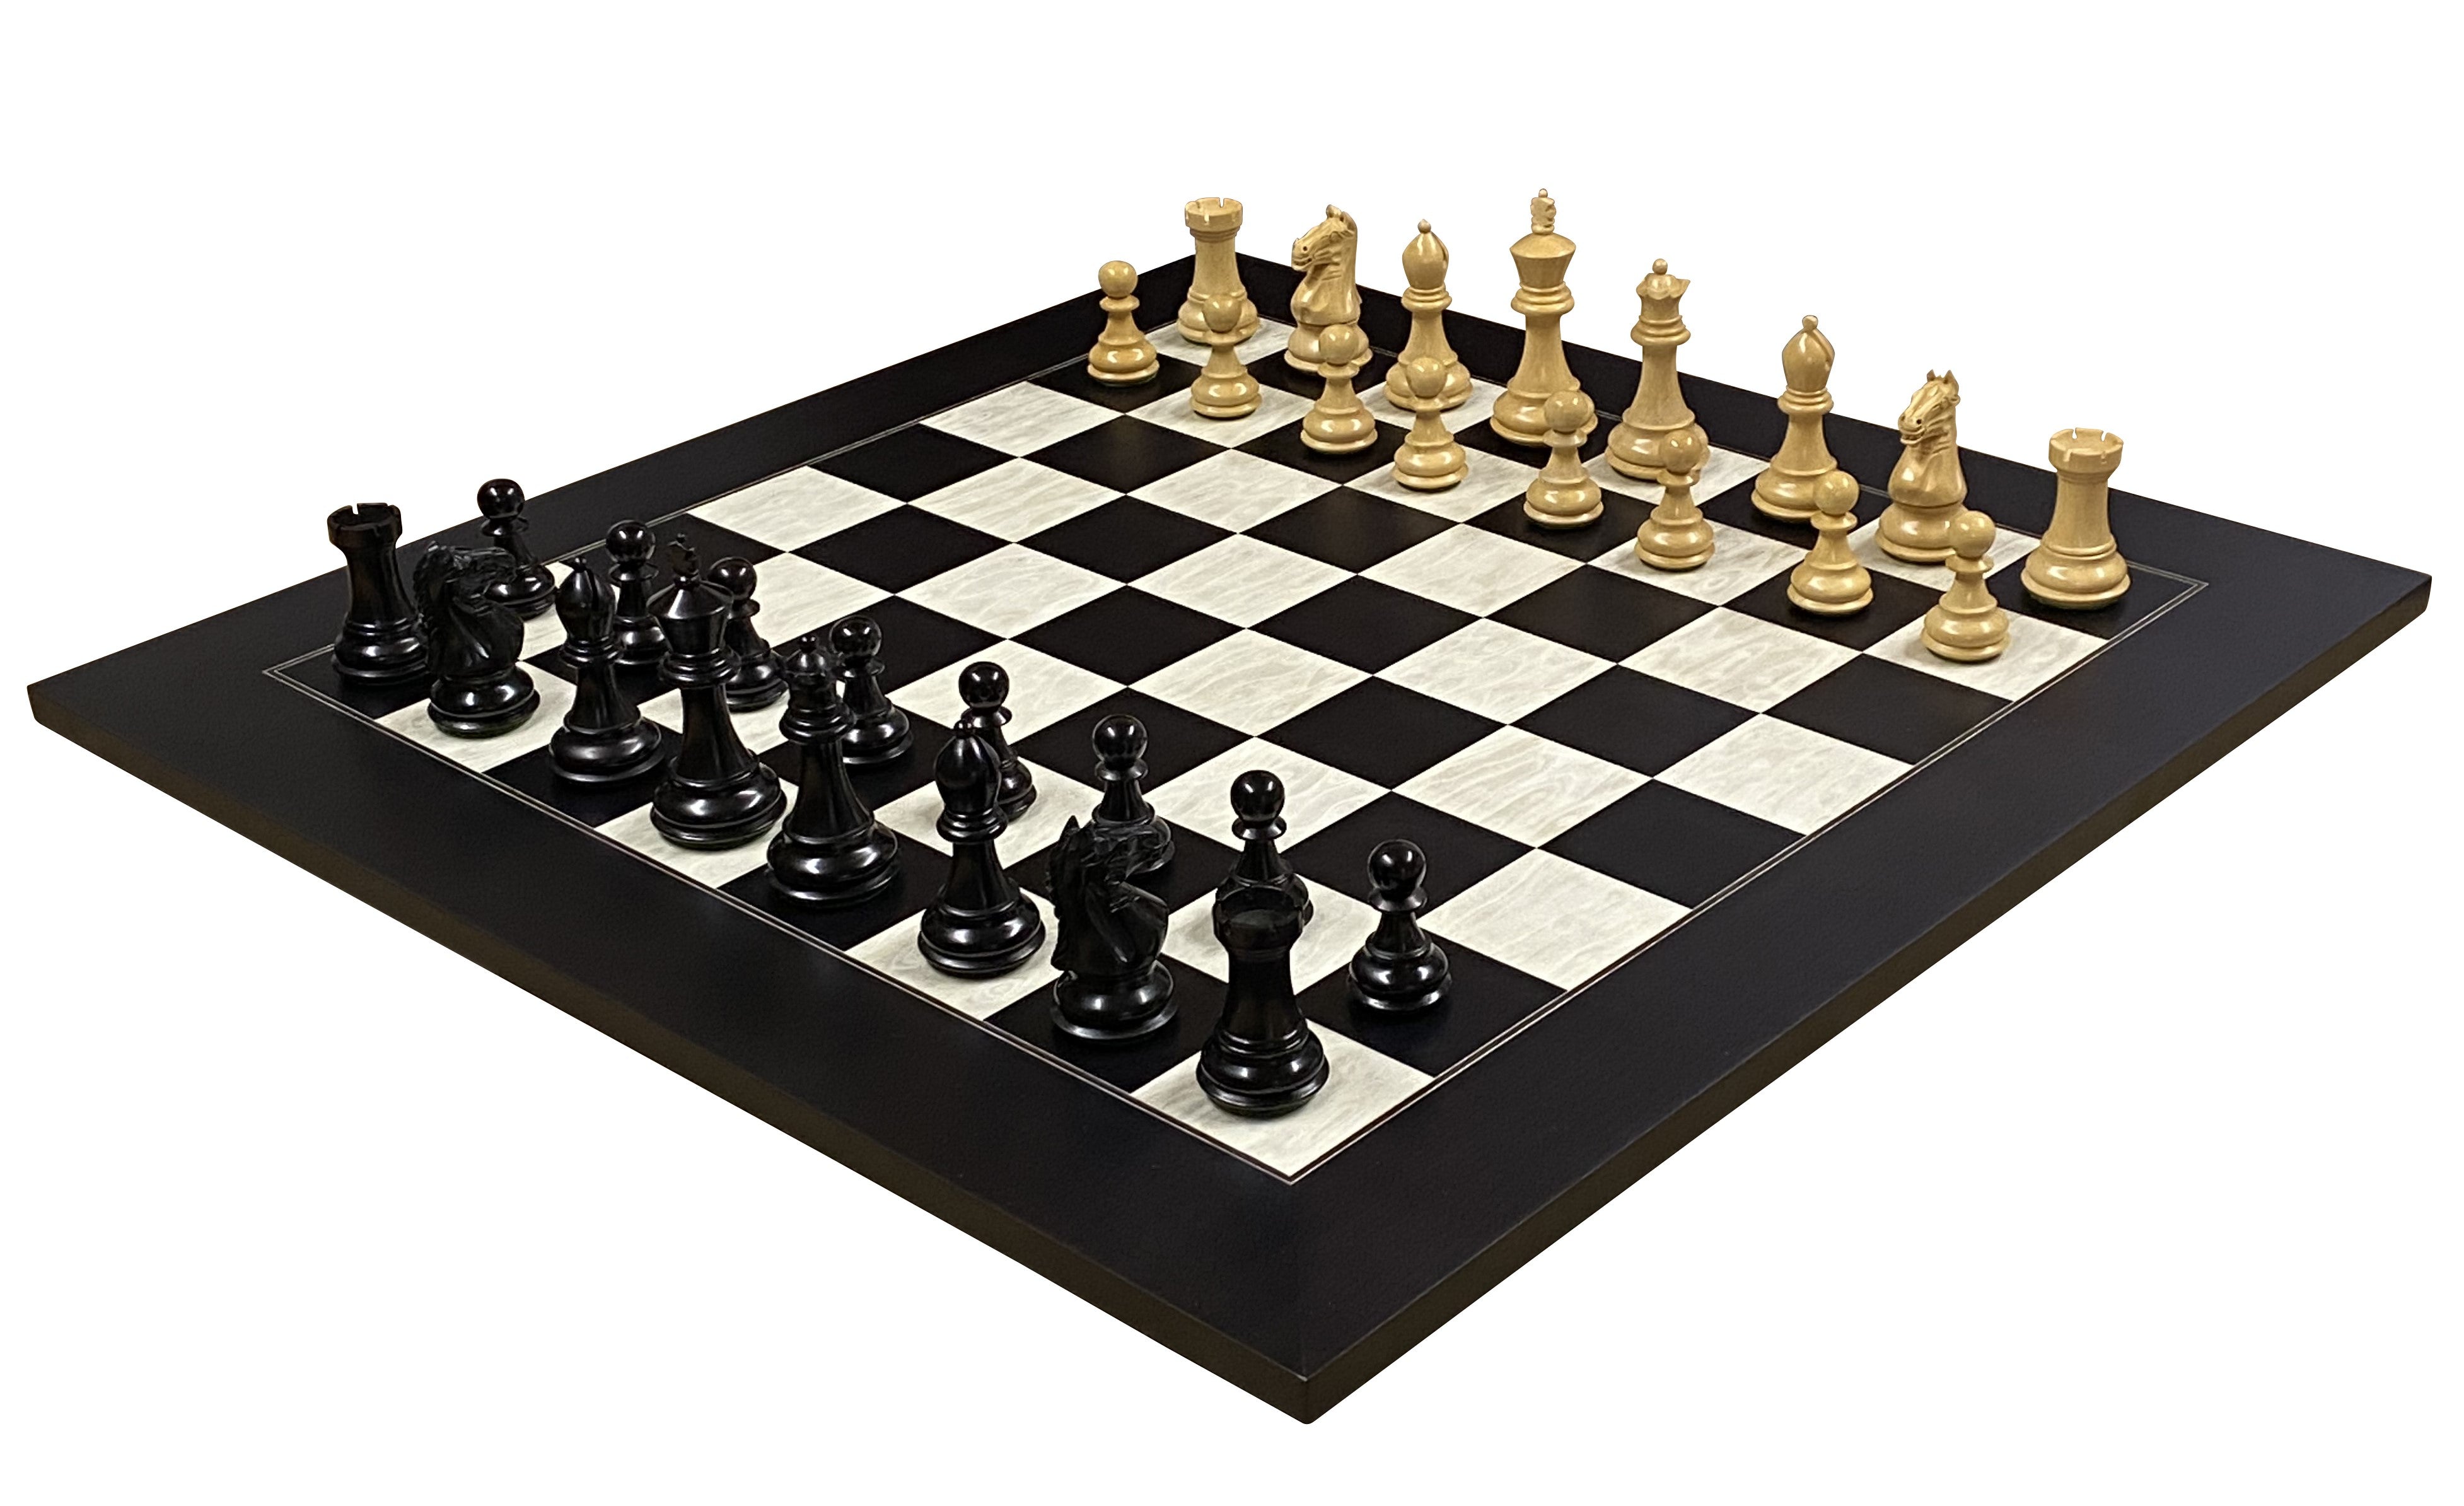 Themed Chess Sets - Buy Online With Free Shipping From The Regency Chess  Co. Ltd